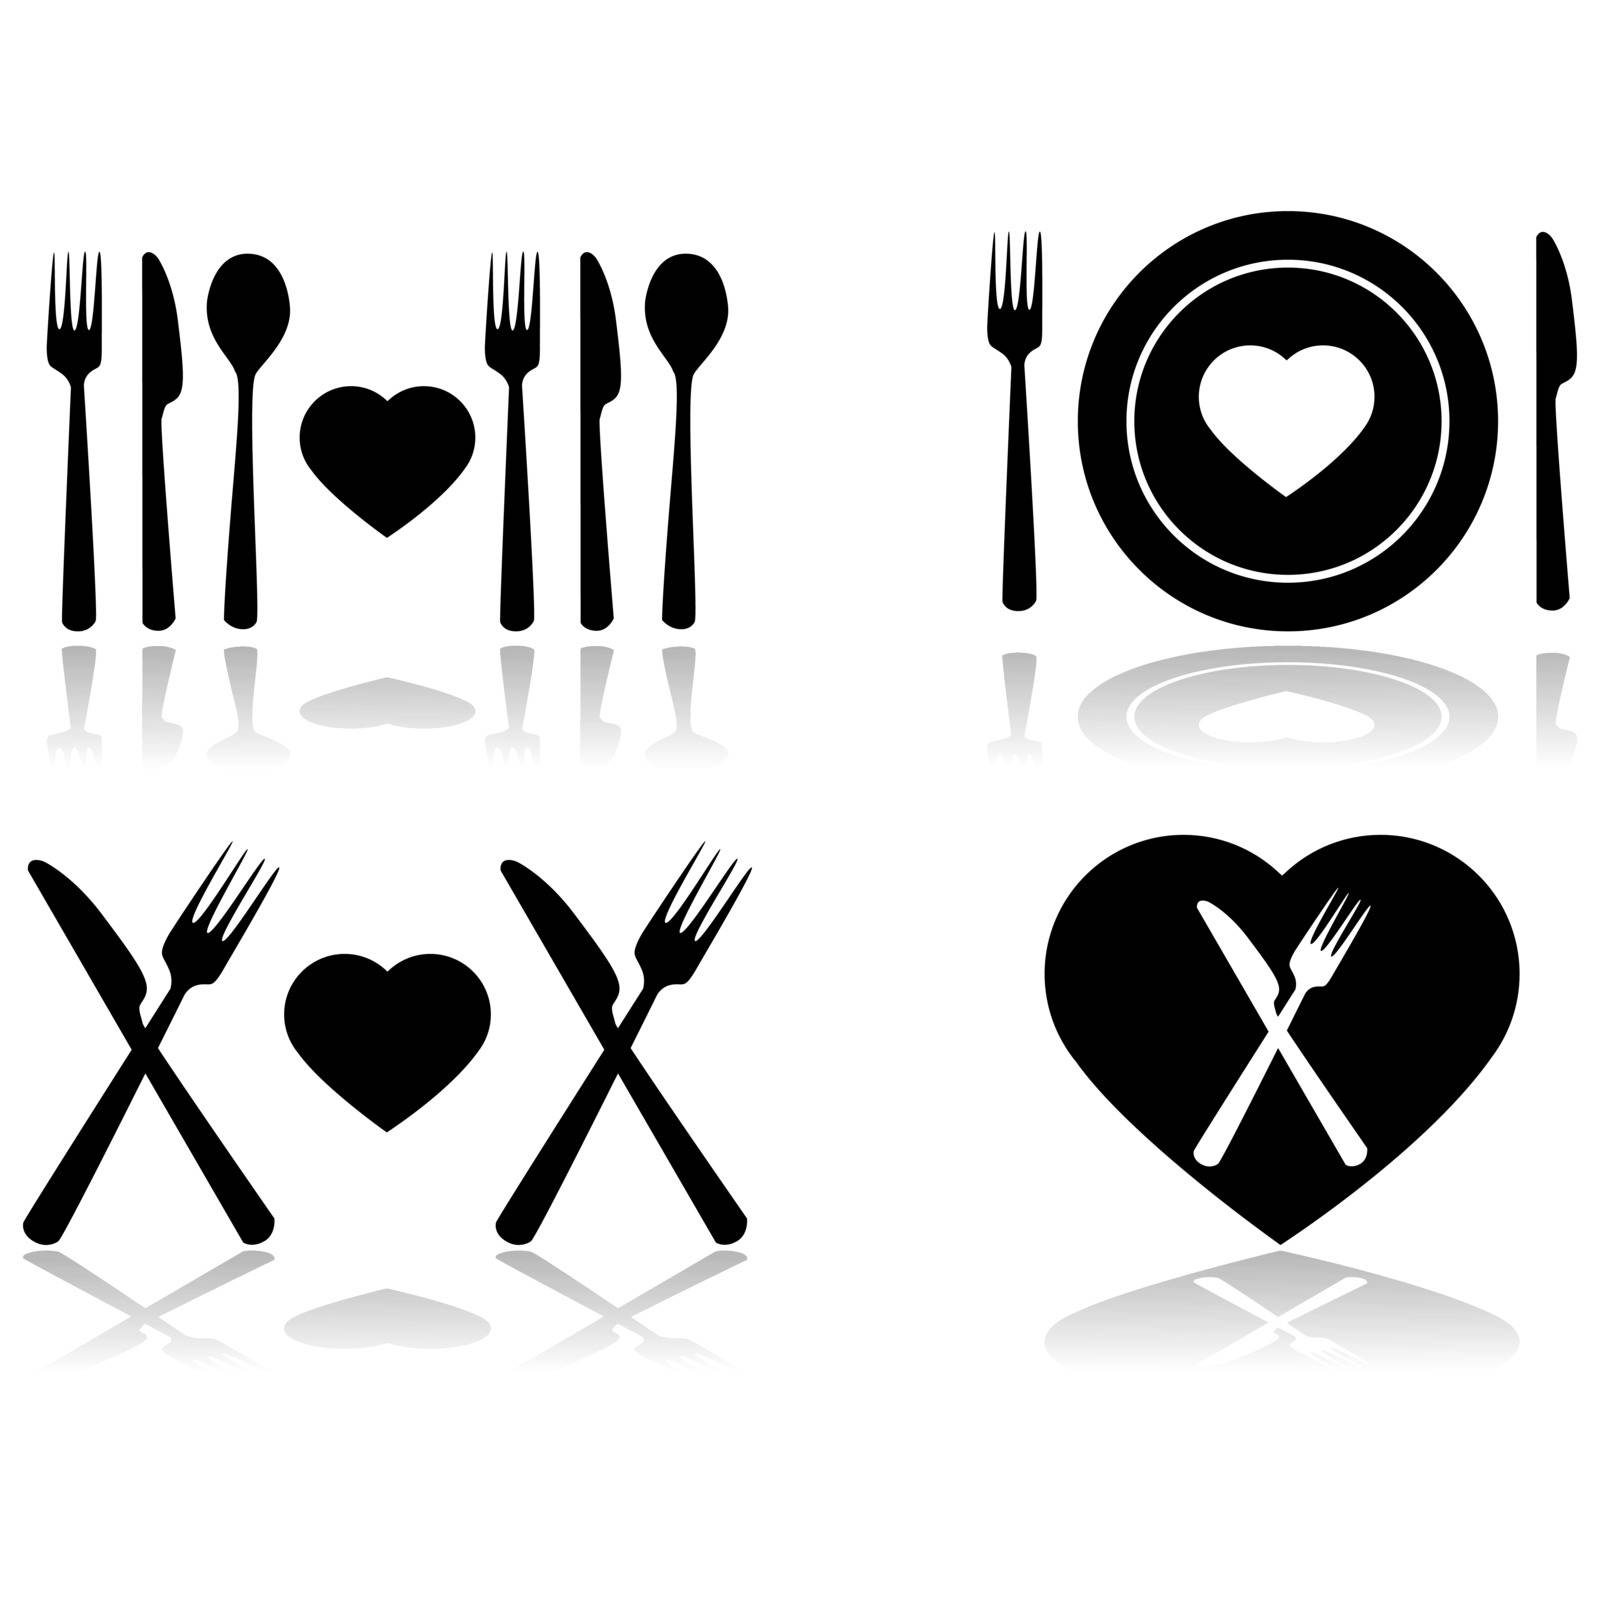 Illustration set showing four different icons symbolizing a dinner date